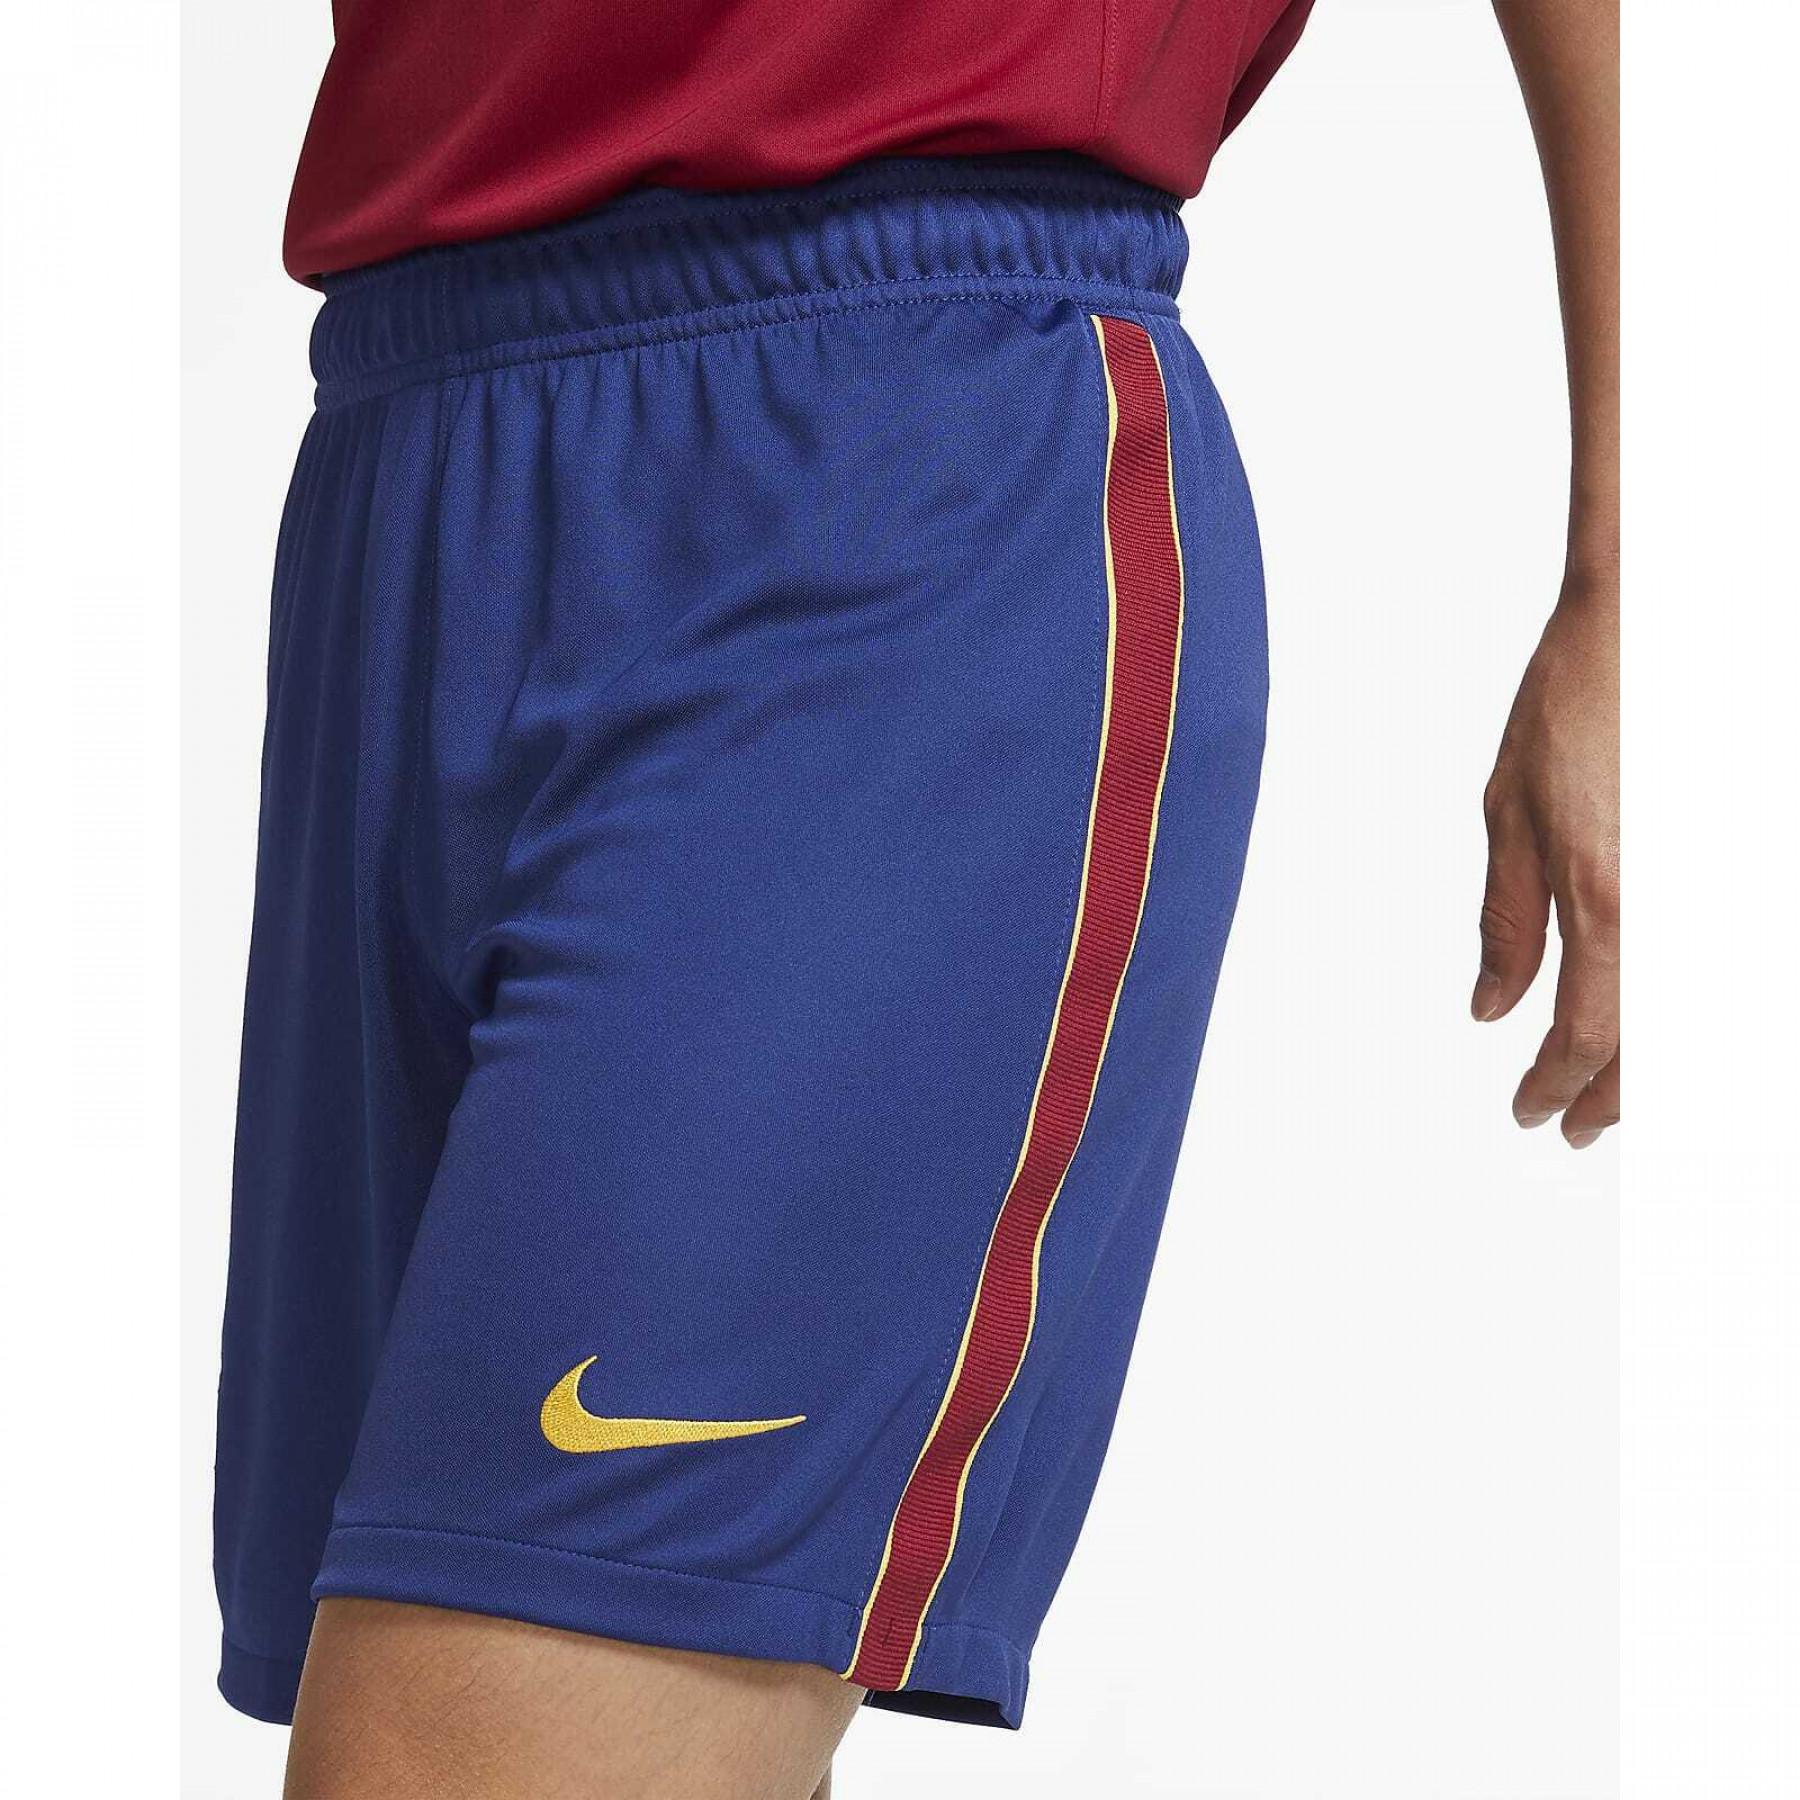 Authentic Barcelona home shorts 2020/21